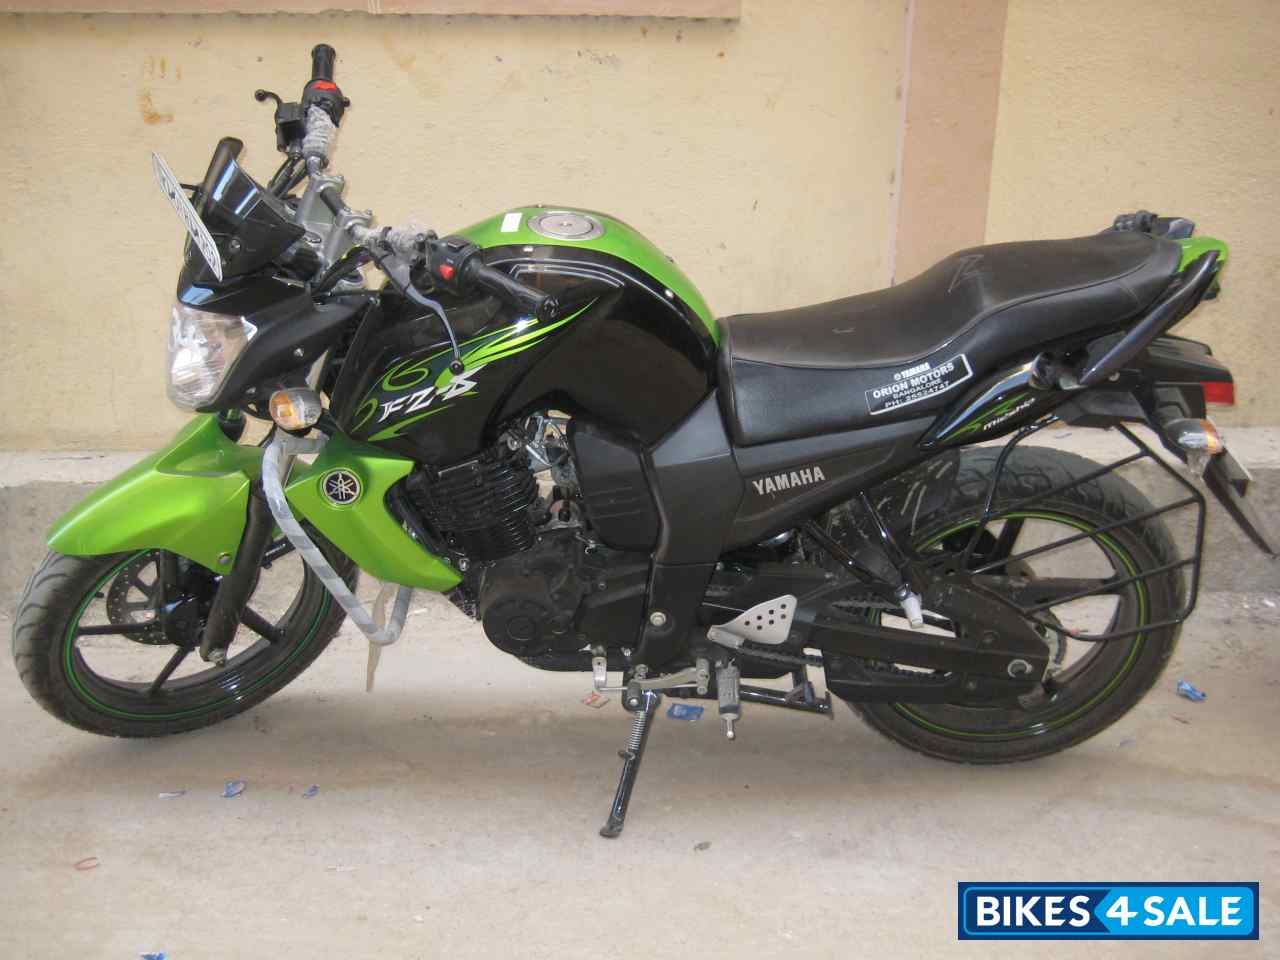 Used 2013 model Yamaha FZ-S for sale in Bangalore. ID ...